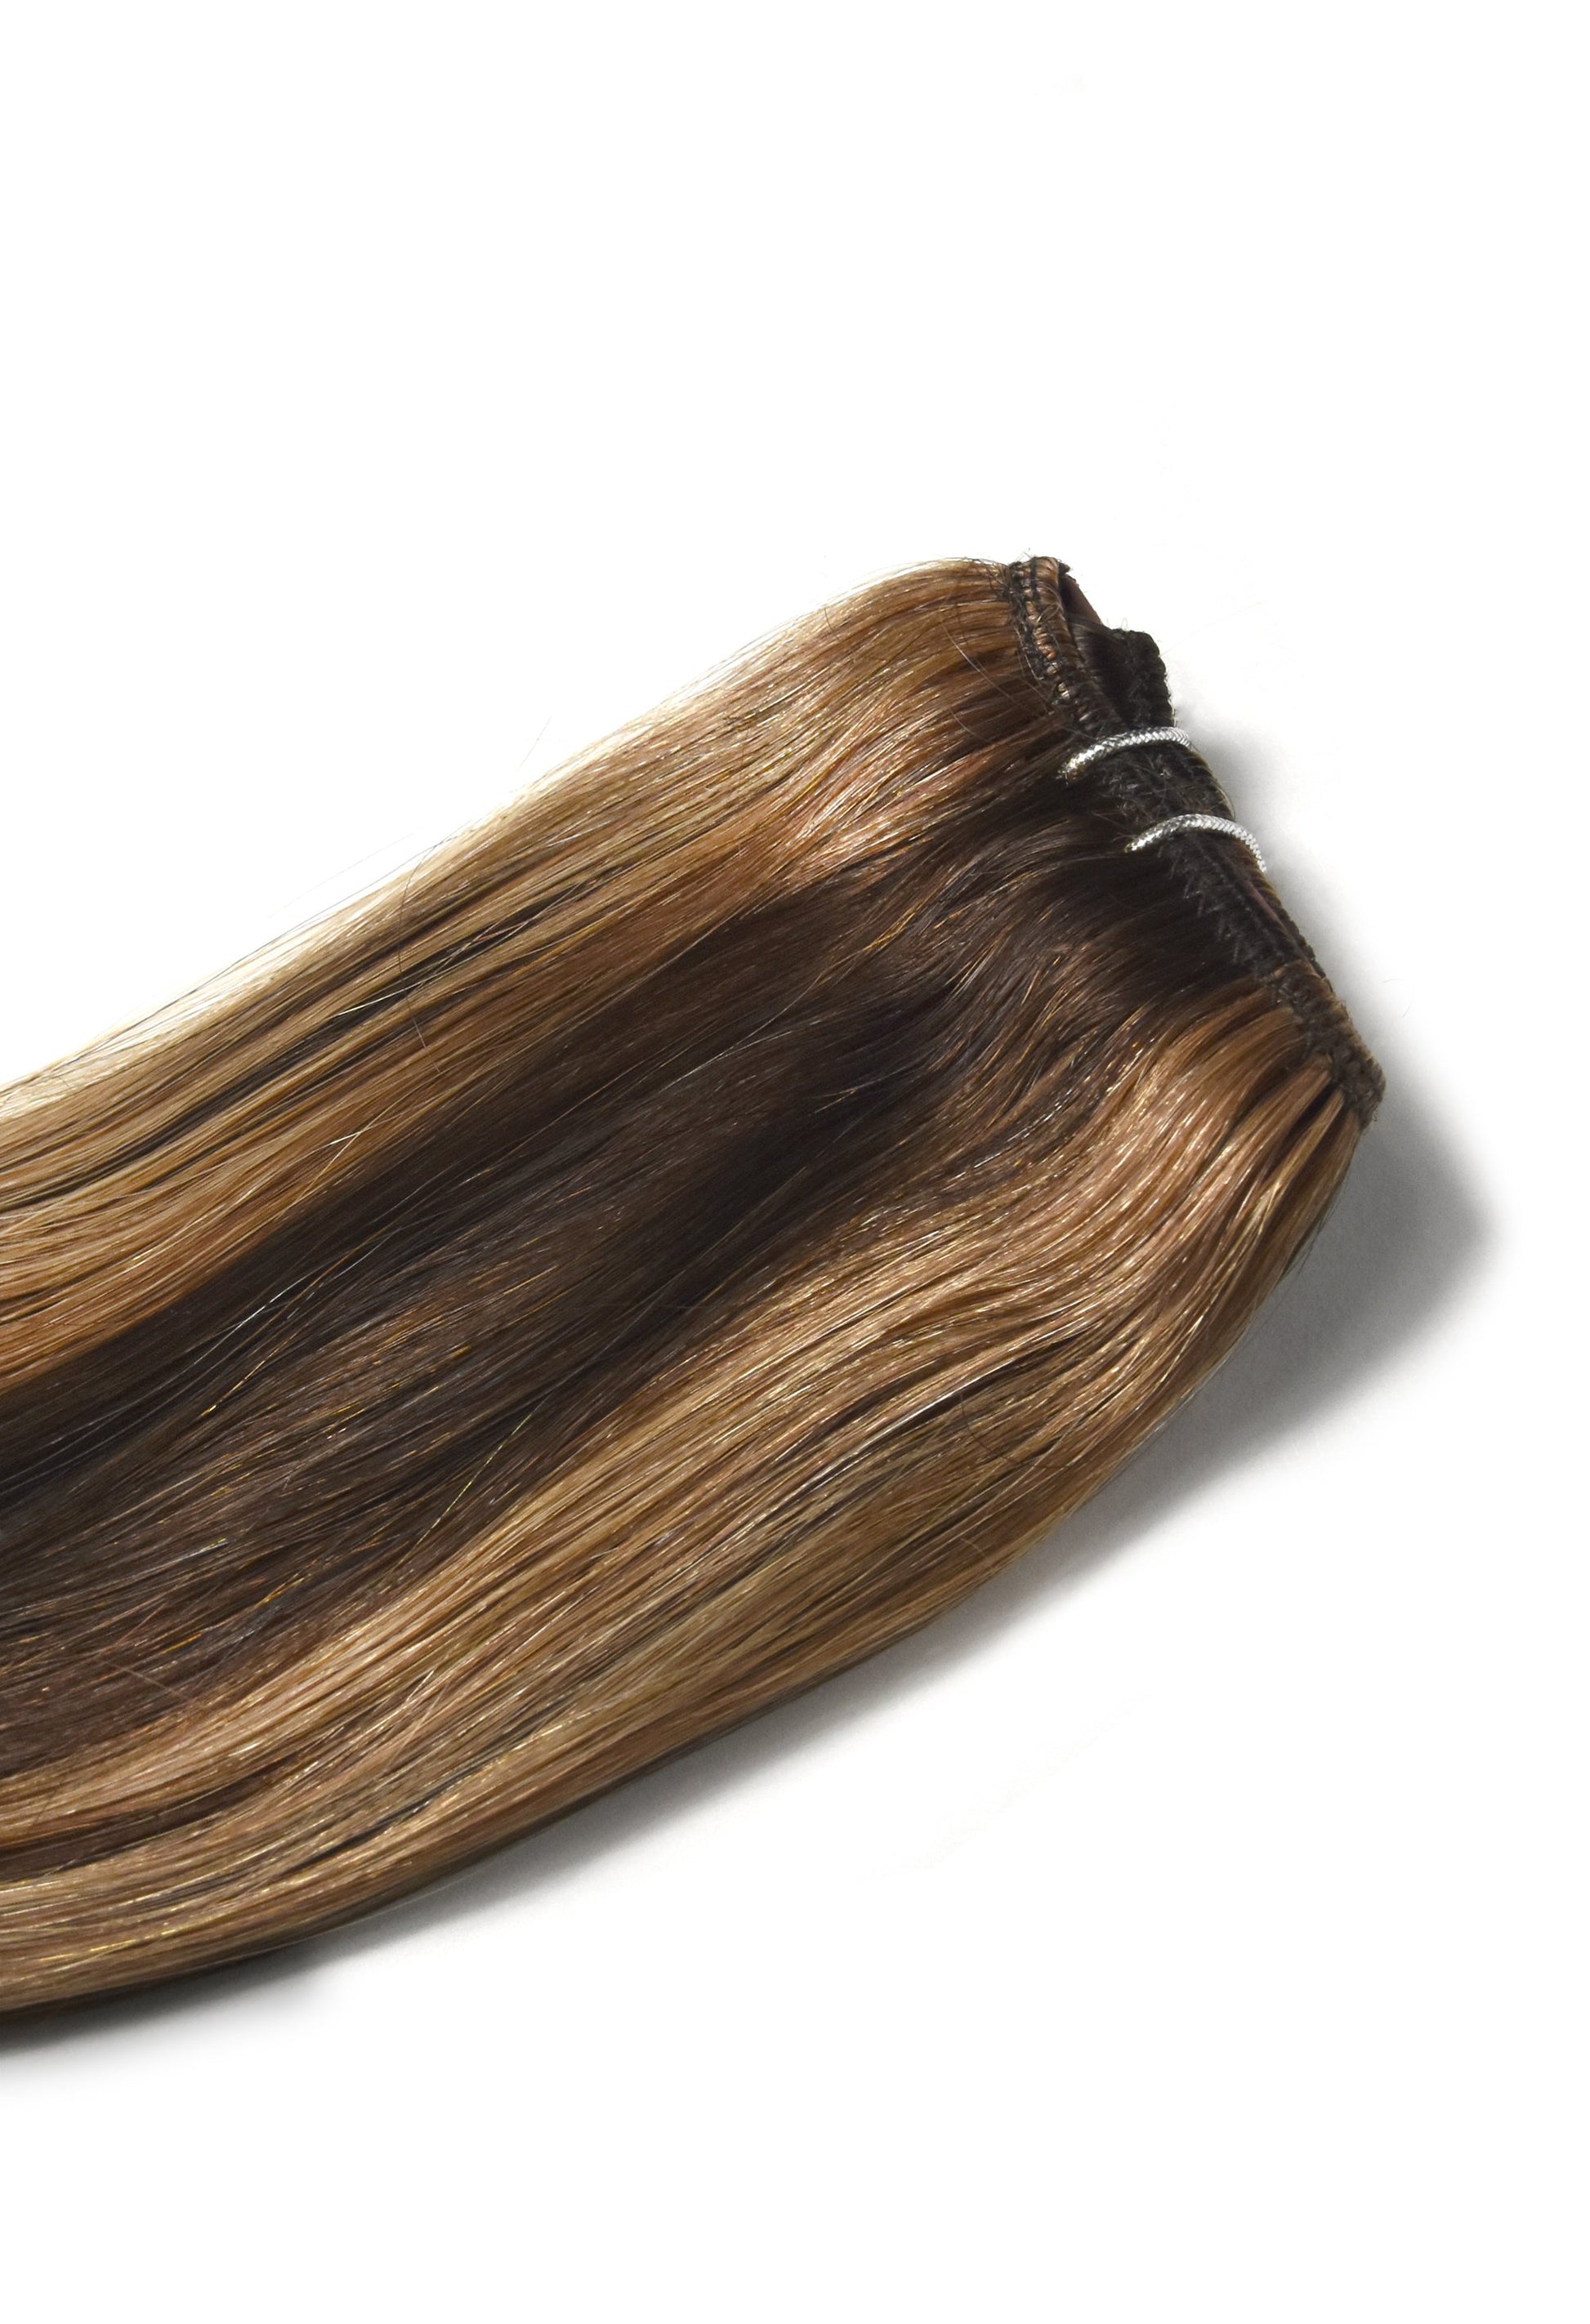 clip in human hair extensions one piece brown auburn highlights